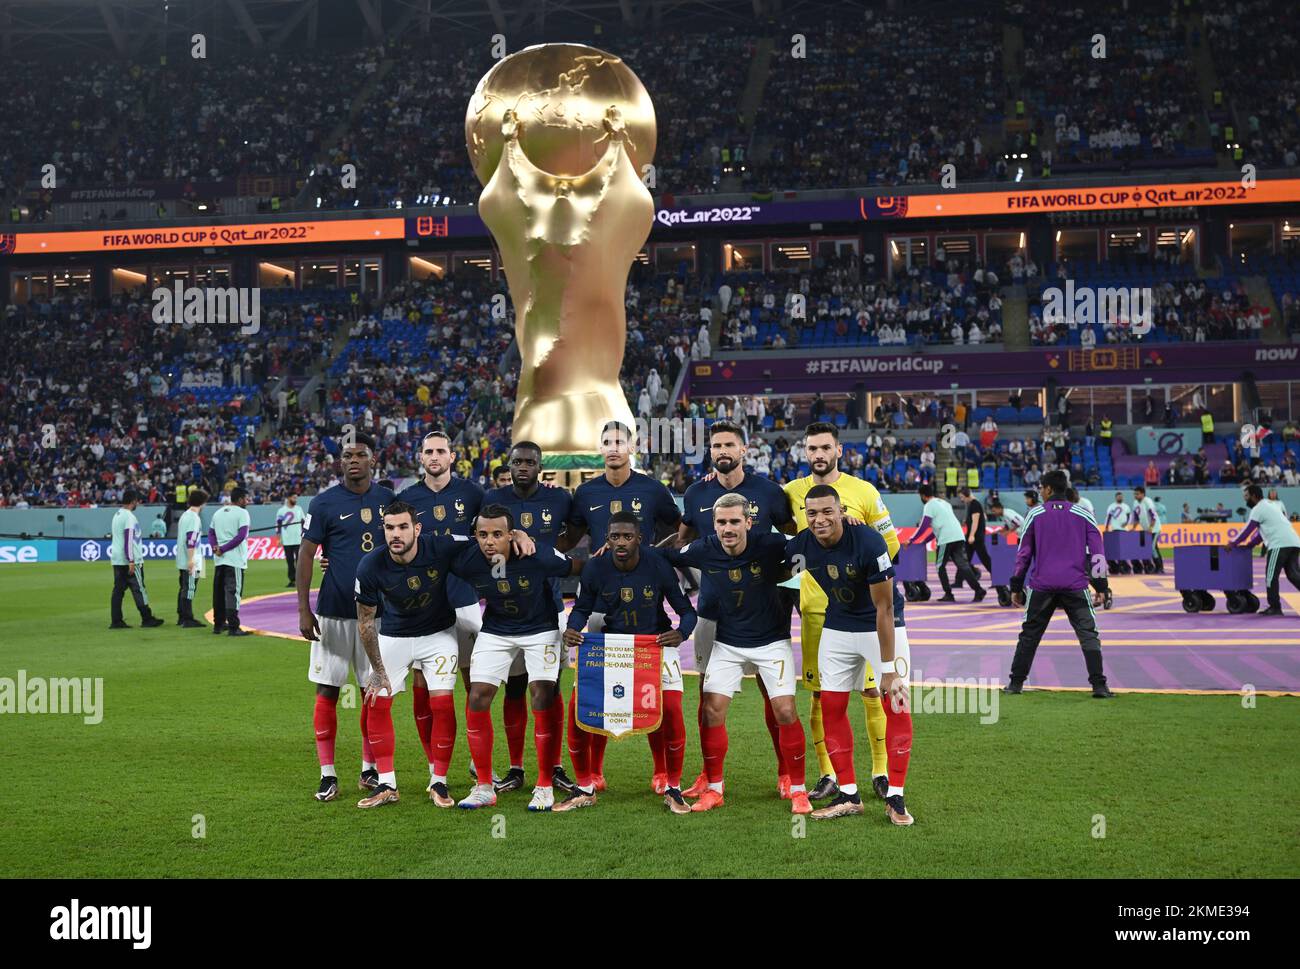 Doha, Qatar. 26th Nov, 2022. Soccer, World Cup, France - Denmark, Preliminary Round, Group D, Matchday 2, Stadium 974, the players of the French starting eleven stand together for a team photo in front of the oversized replica of the World Cup trophy before the start of the match, Aurélien Tchouameni (l-r), Theo Hernandez, Adrien Rabiot, Jules Kounde, Dayot Upamecano, Raphael Varane, Ousmane Dembele, Olivier Giroud, Antoine Griezmann, goalkeeper Hugo Lloris and Kylian Mbappe. Credit: Robert Michael/dpa/Alamy Live News Stock Photo